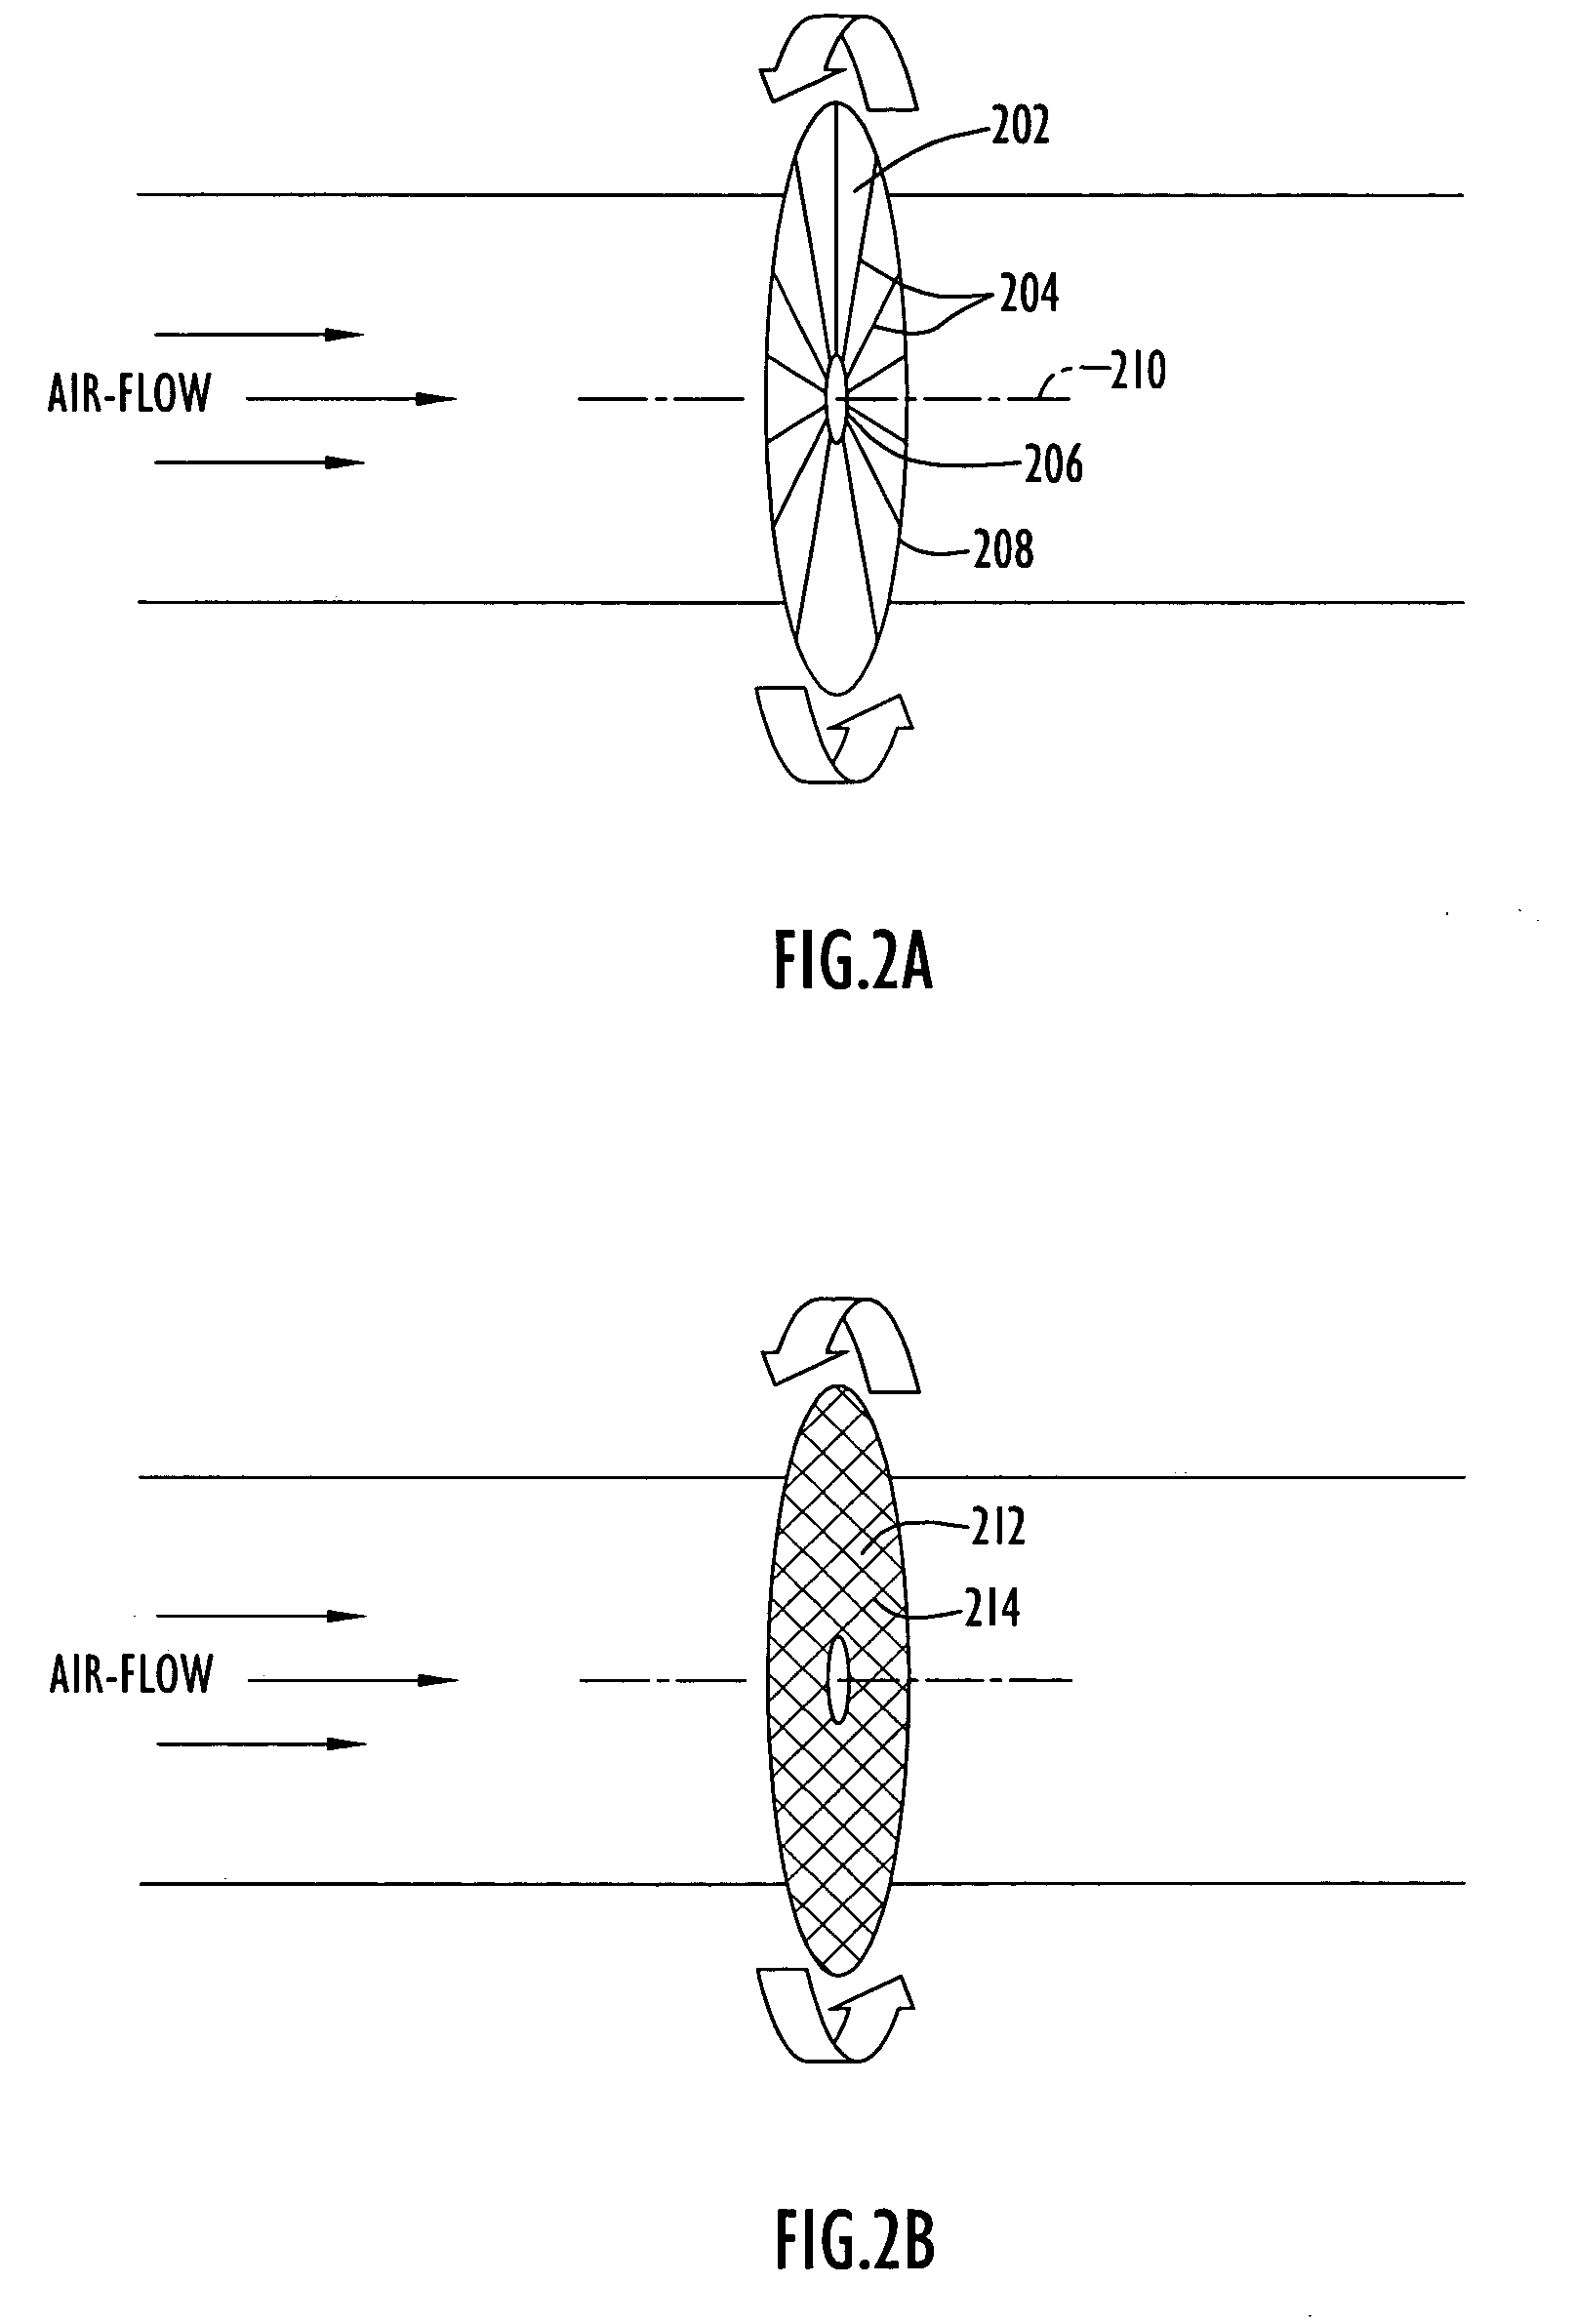 Method and apparatus for filtering particulate matter from an air-flow